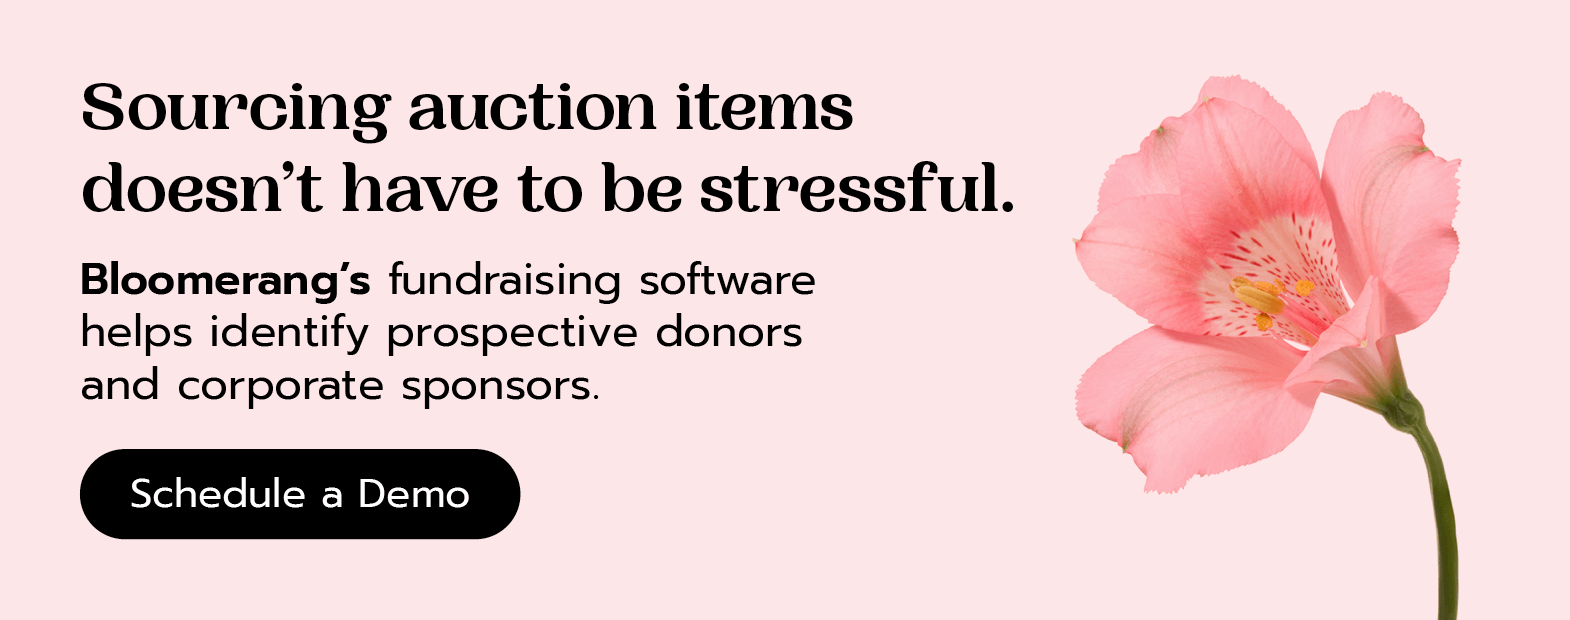 Bloomerang’s fundraising software helps identify prospective donors and corporate sponsors. Schedule a demo.